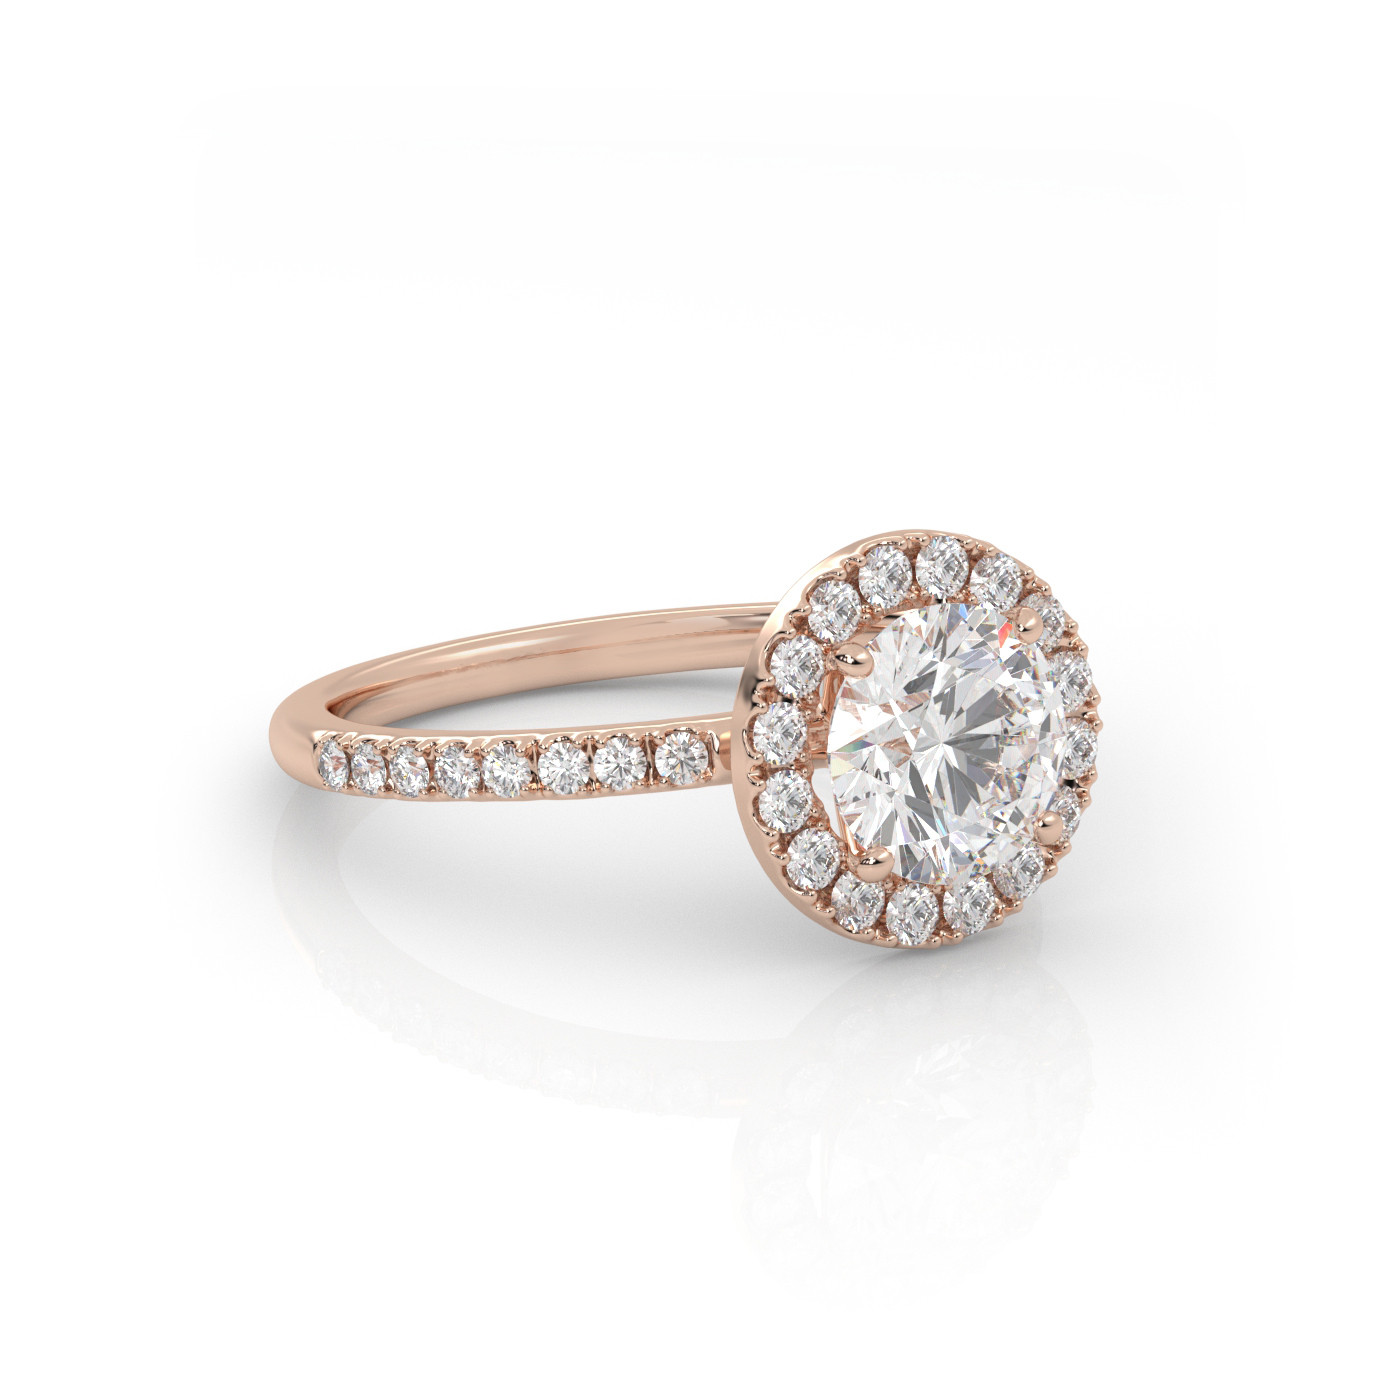 18K ROSE GOLD Round Cut Diamond Engagement Ring with Halo and Pave style